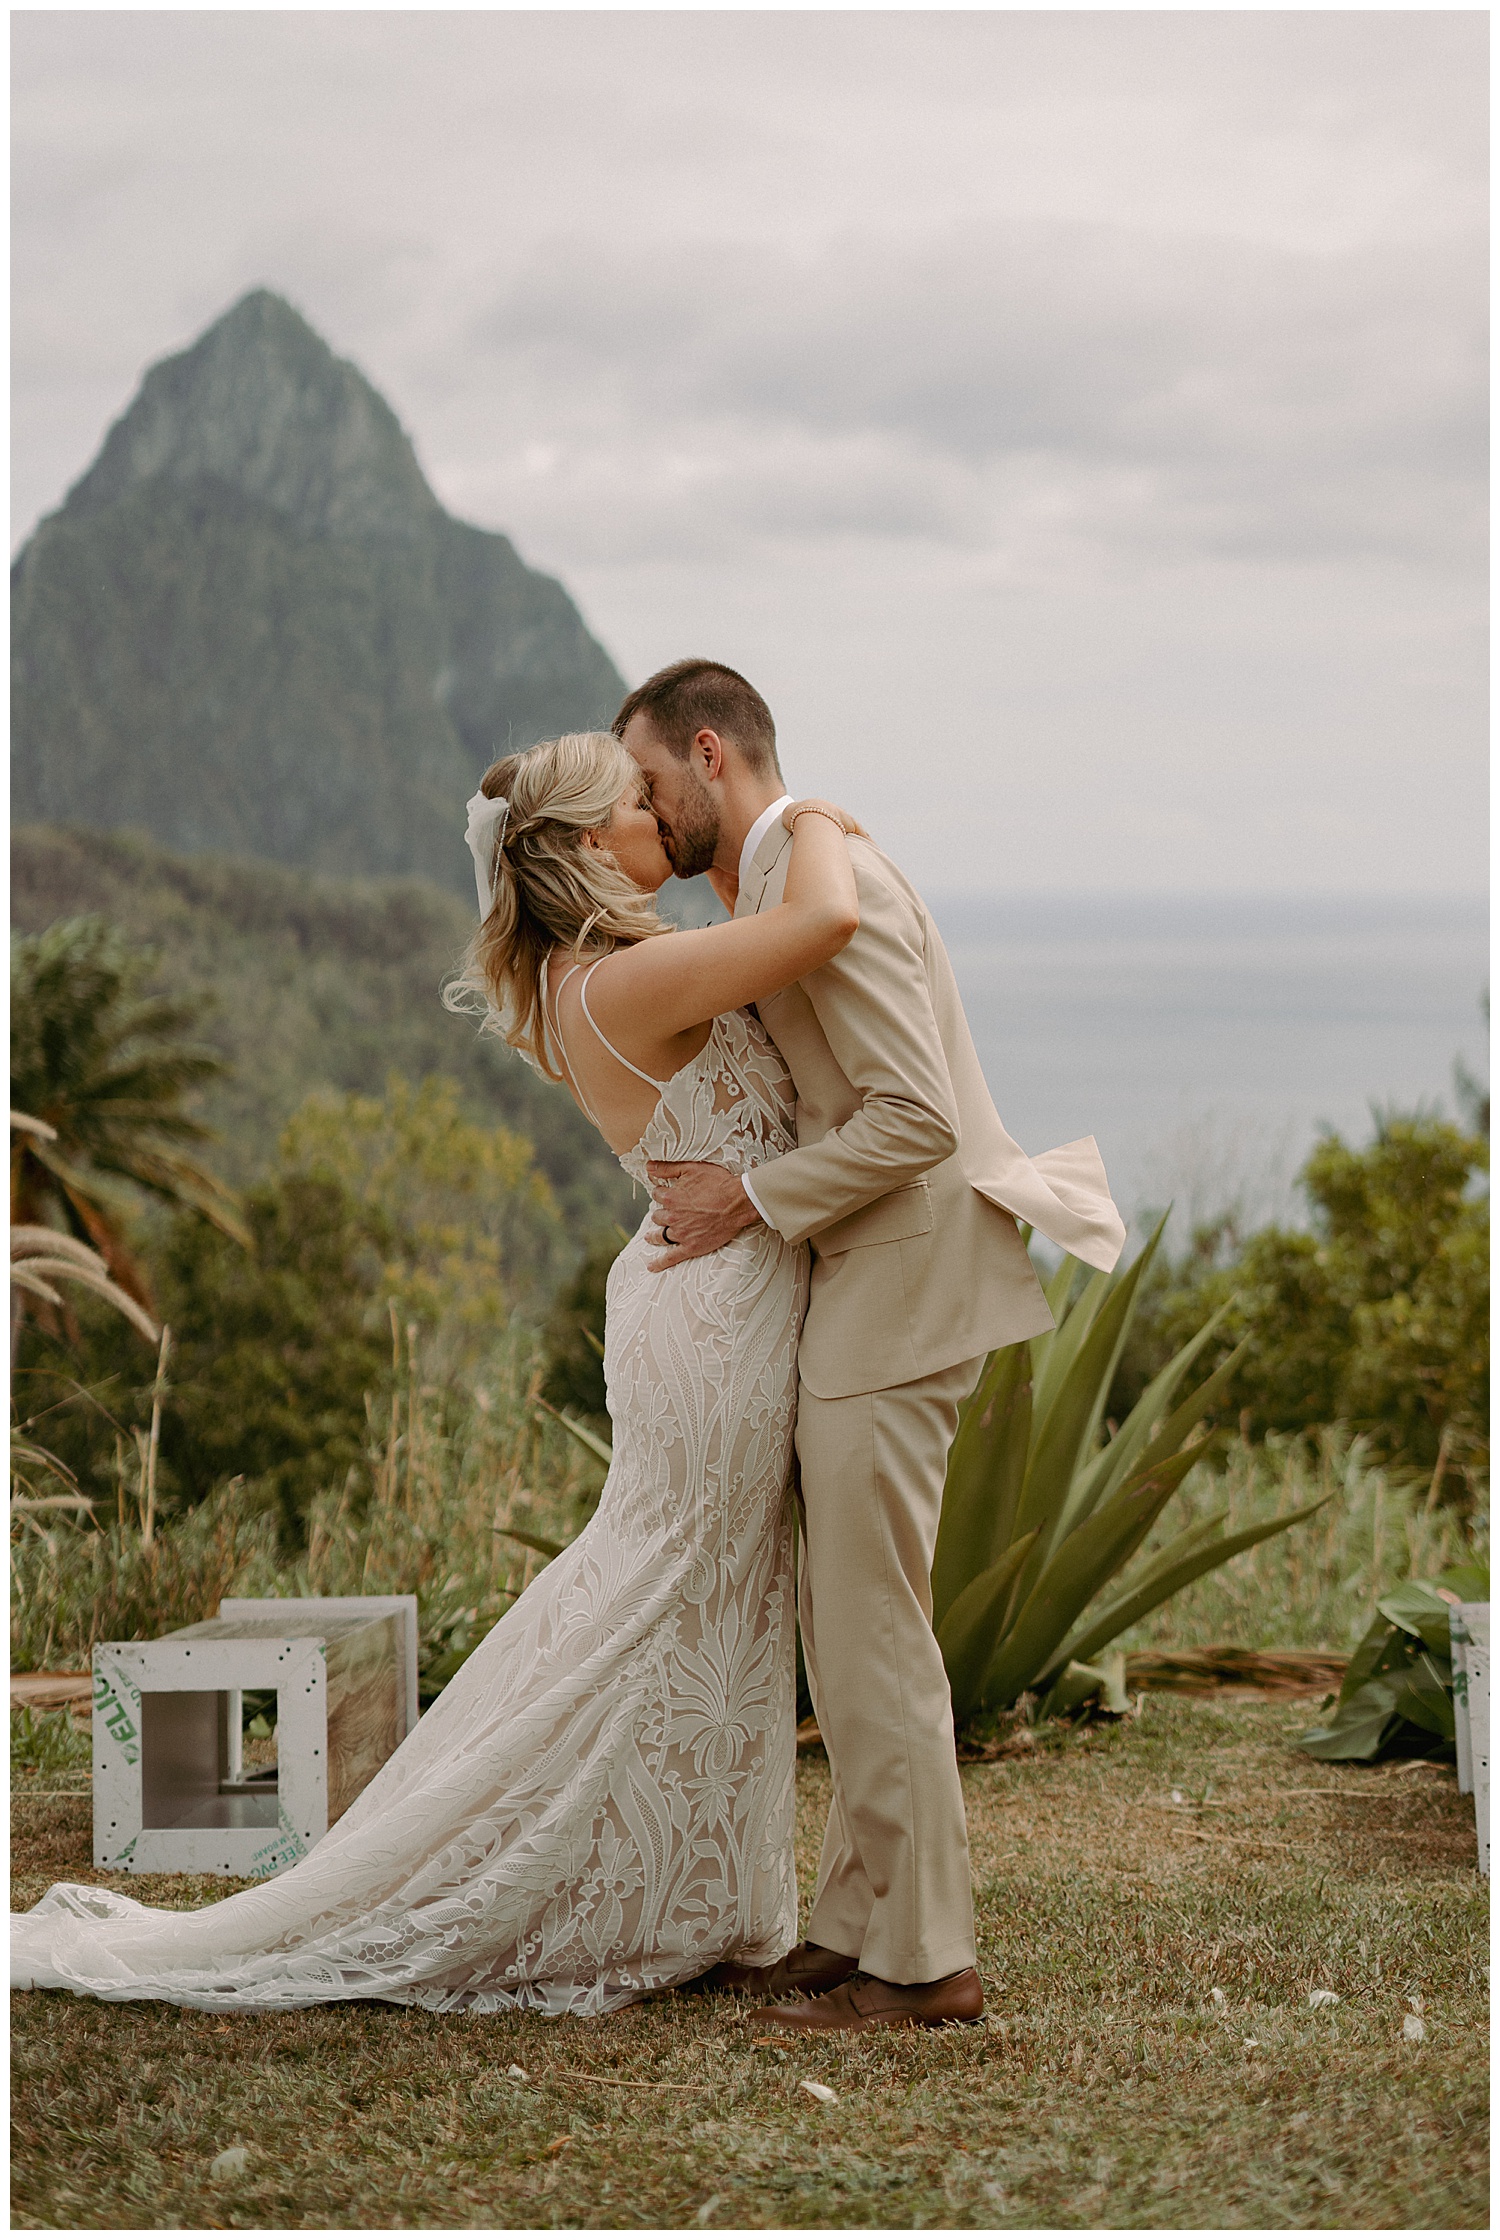 Wedding Ceremony in St Lucia at La Haut Plantation with a view of the Pitons